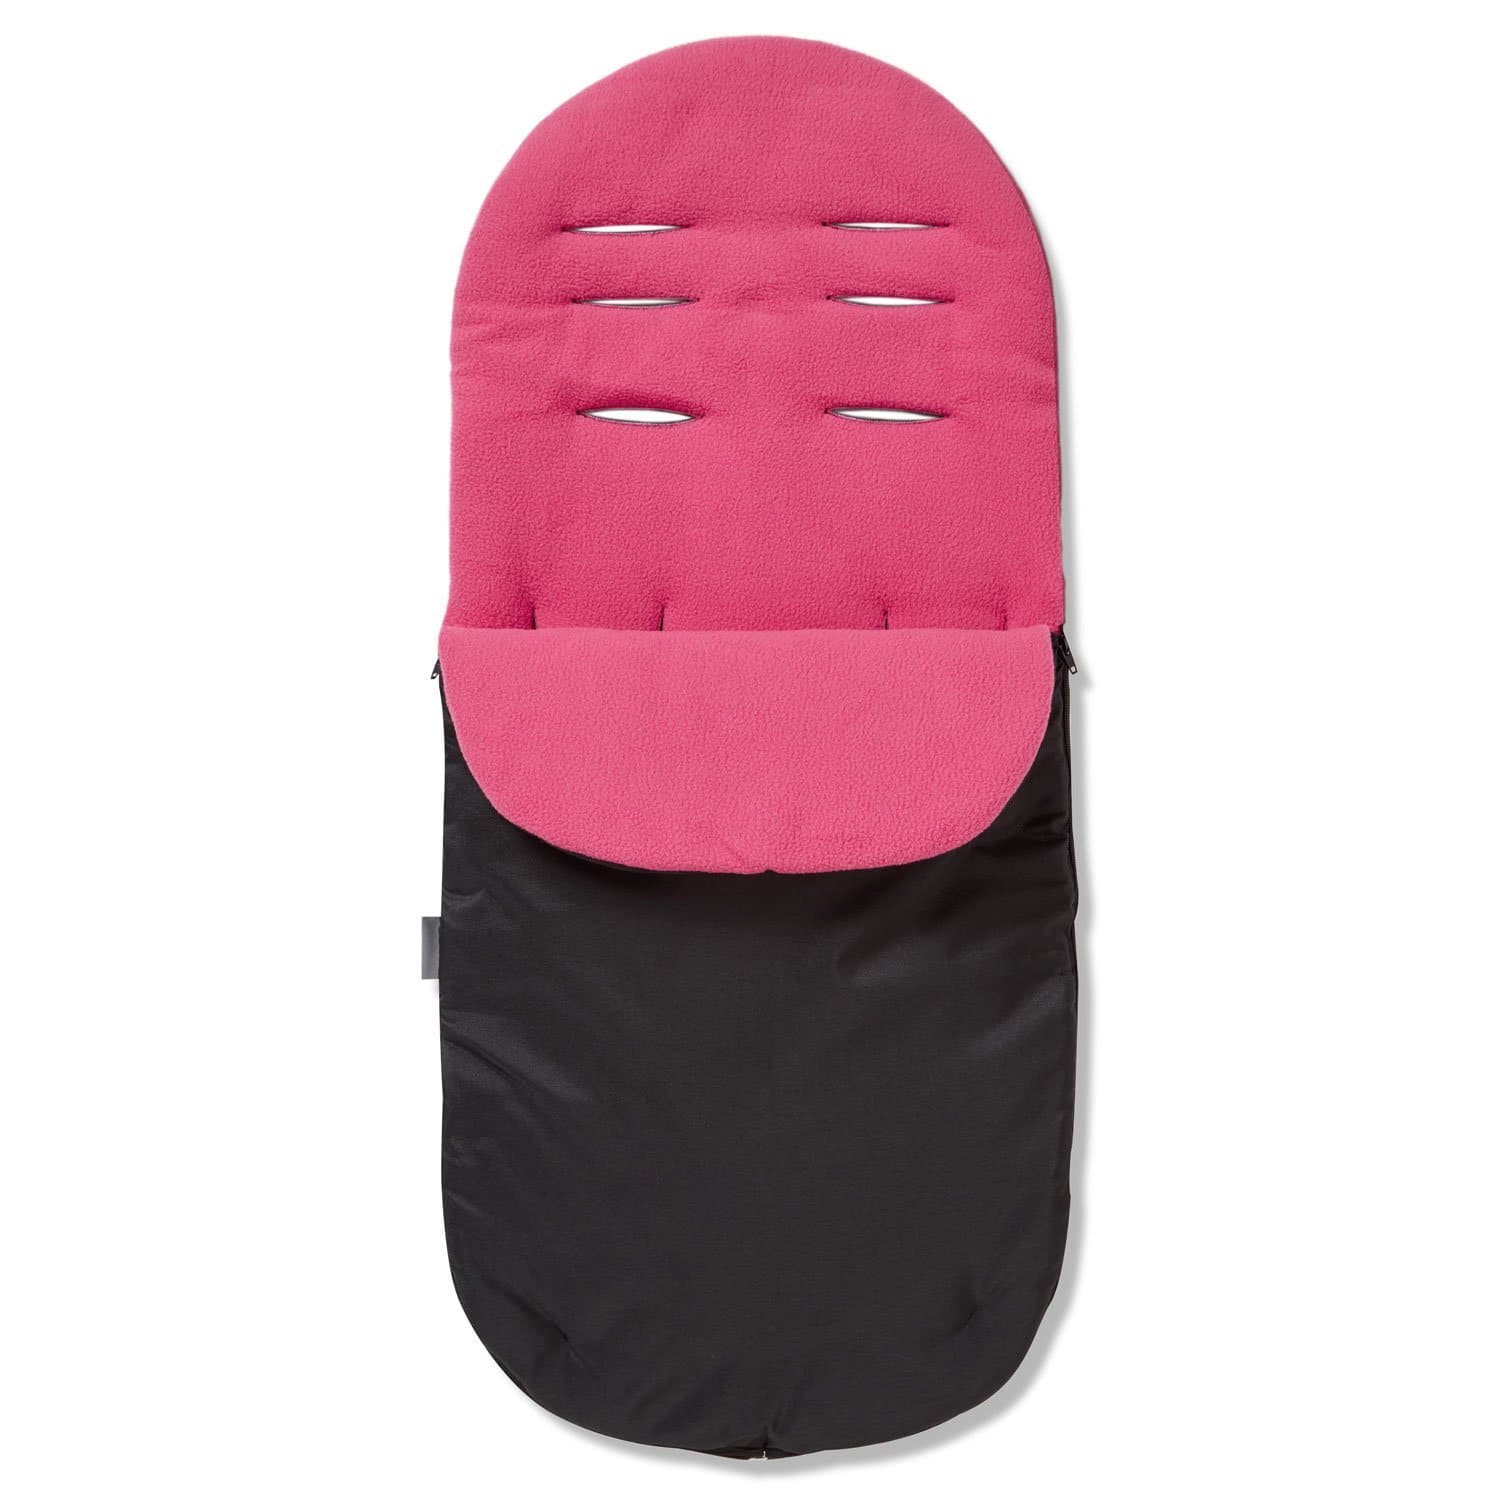 Footmuff / Cosy Toes Compatible with Little Shield - Dark Pink / Fits All Models | For Your Little One